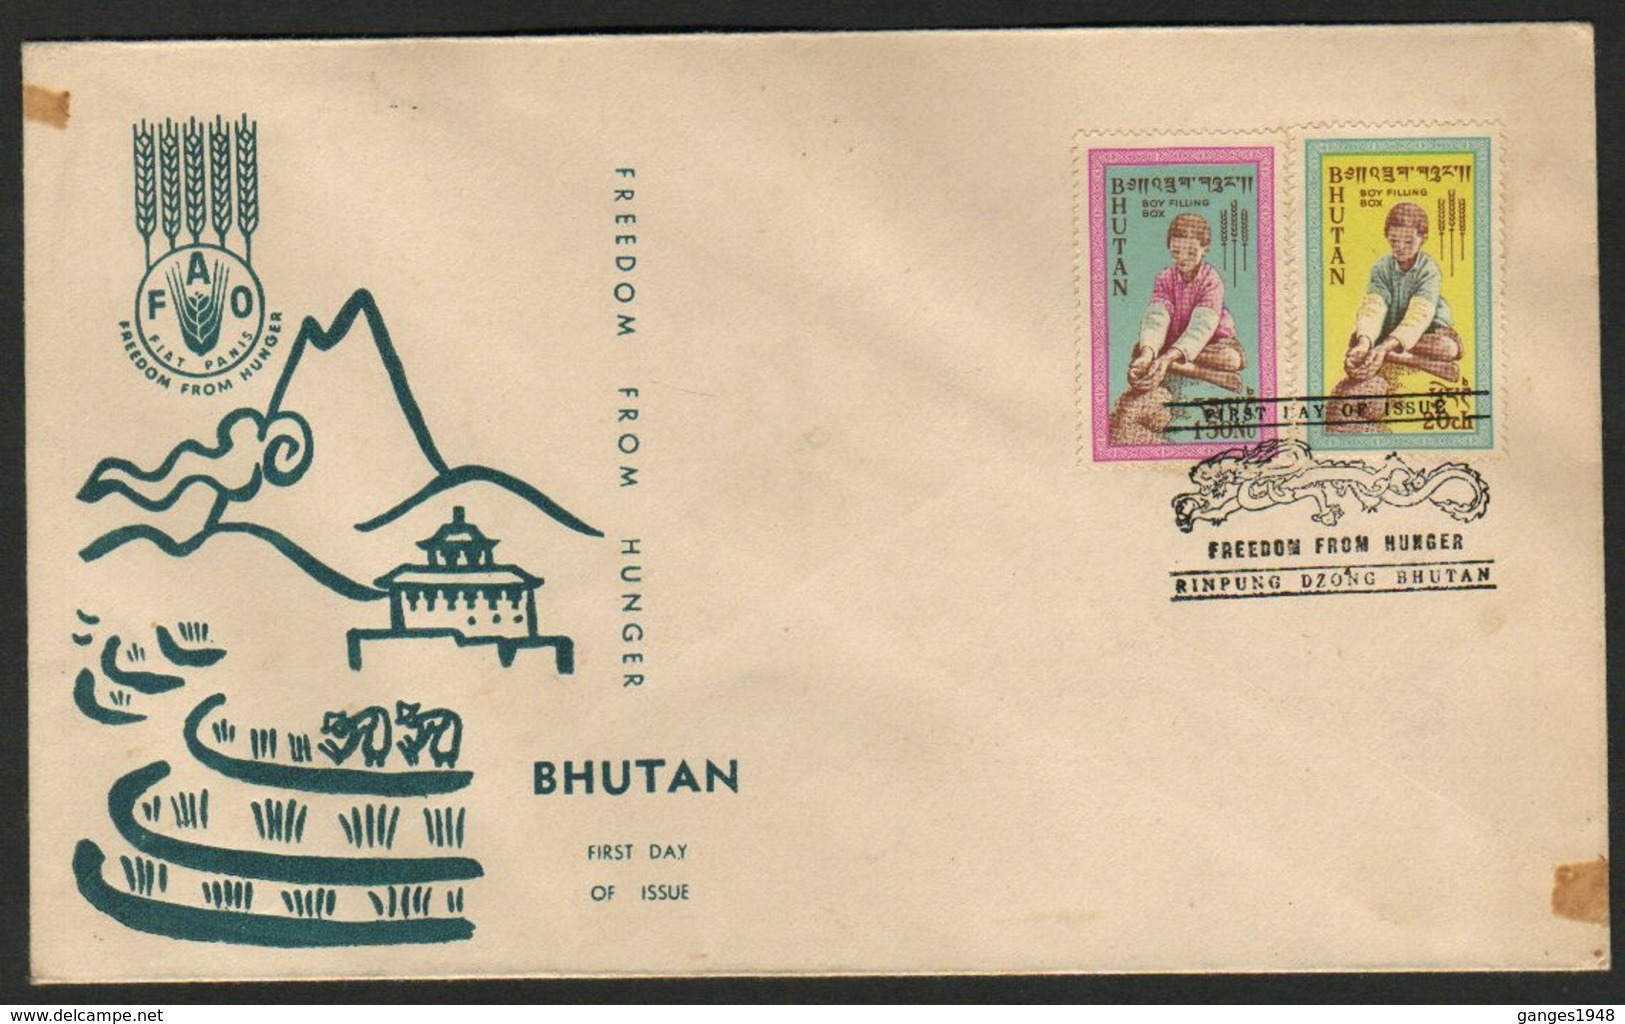 Bhutan  1963  Fredom From Hunger  2v  First Day Cover   #  08208  D  Inde Indien - Bhutan